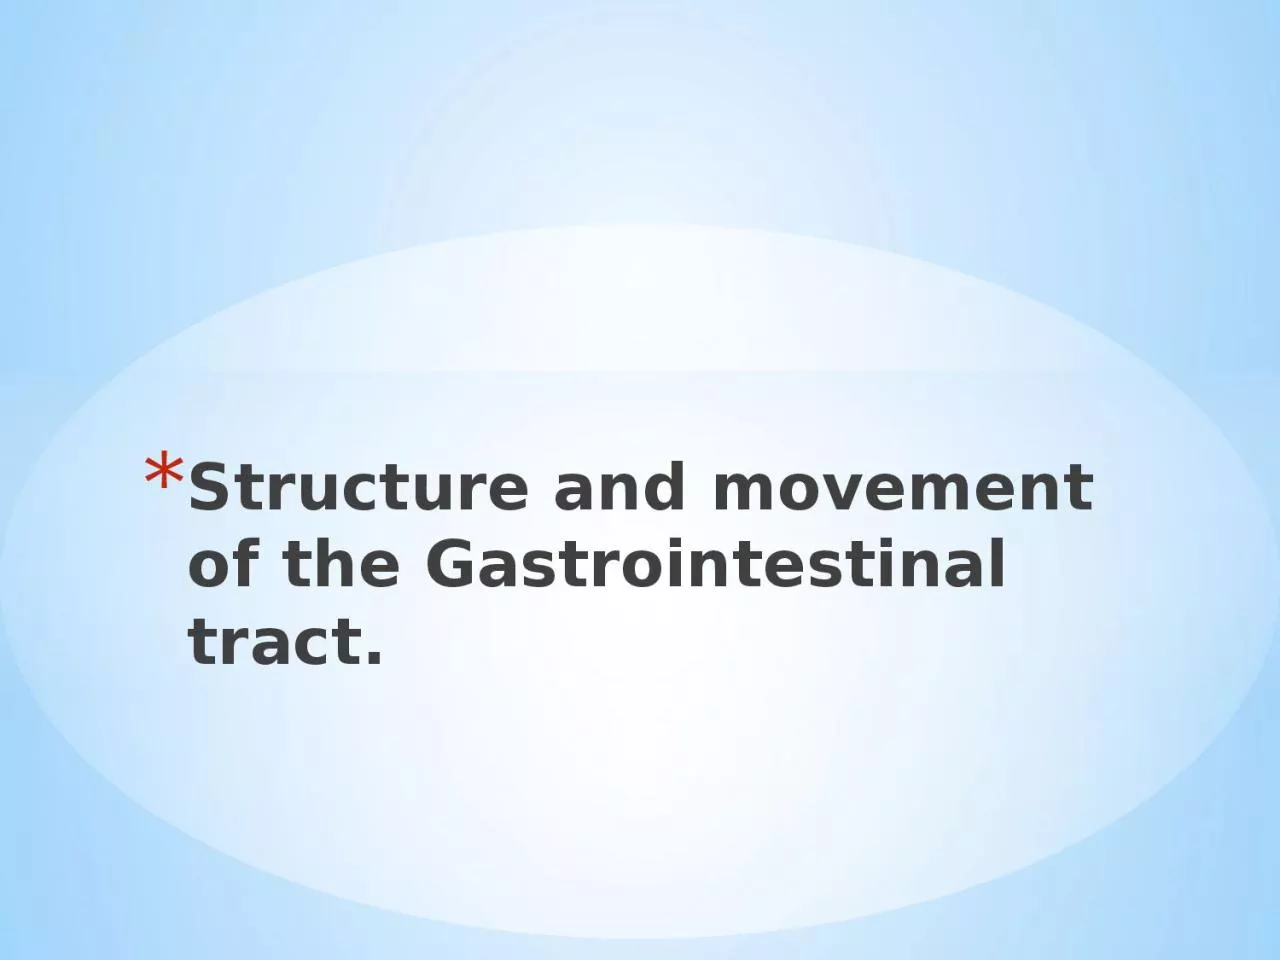 Structure and movement of the